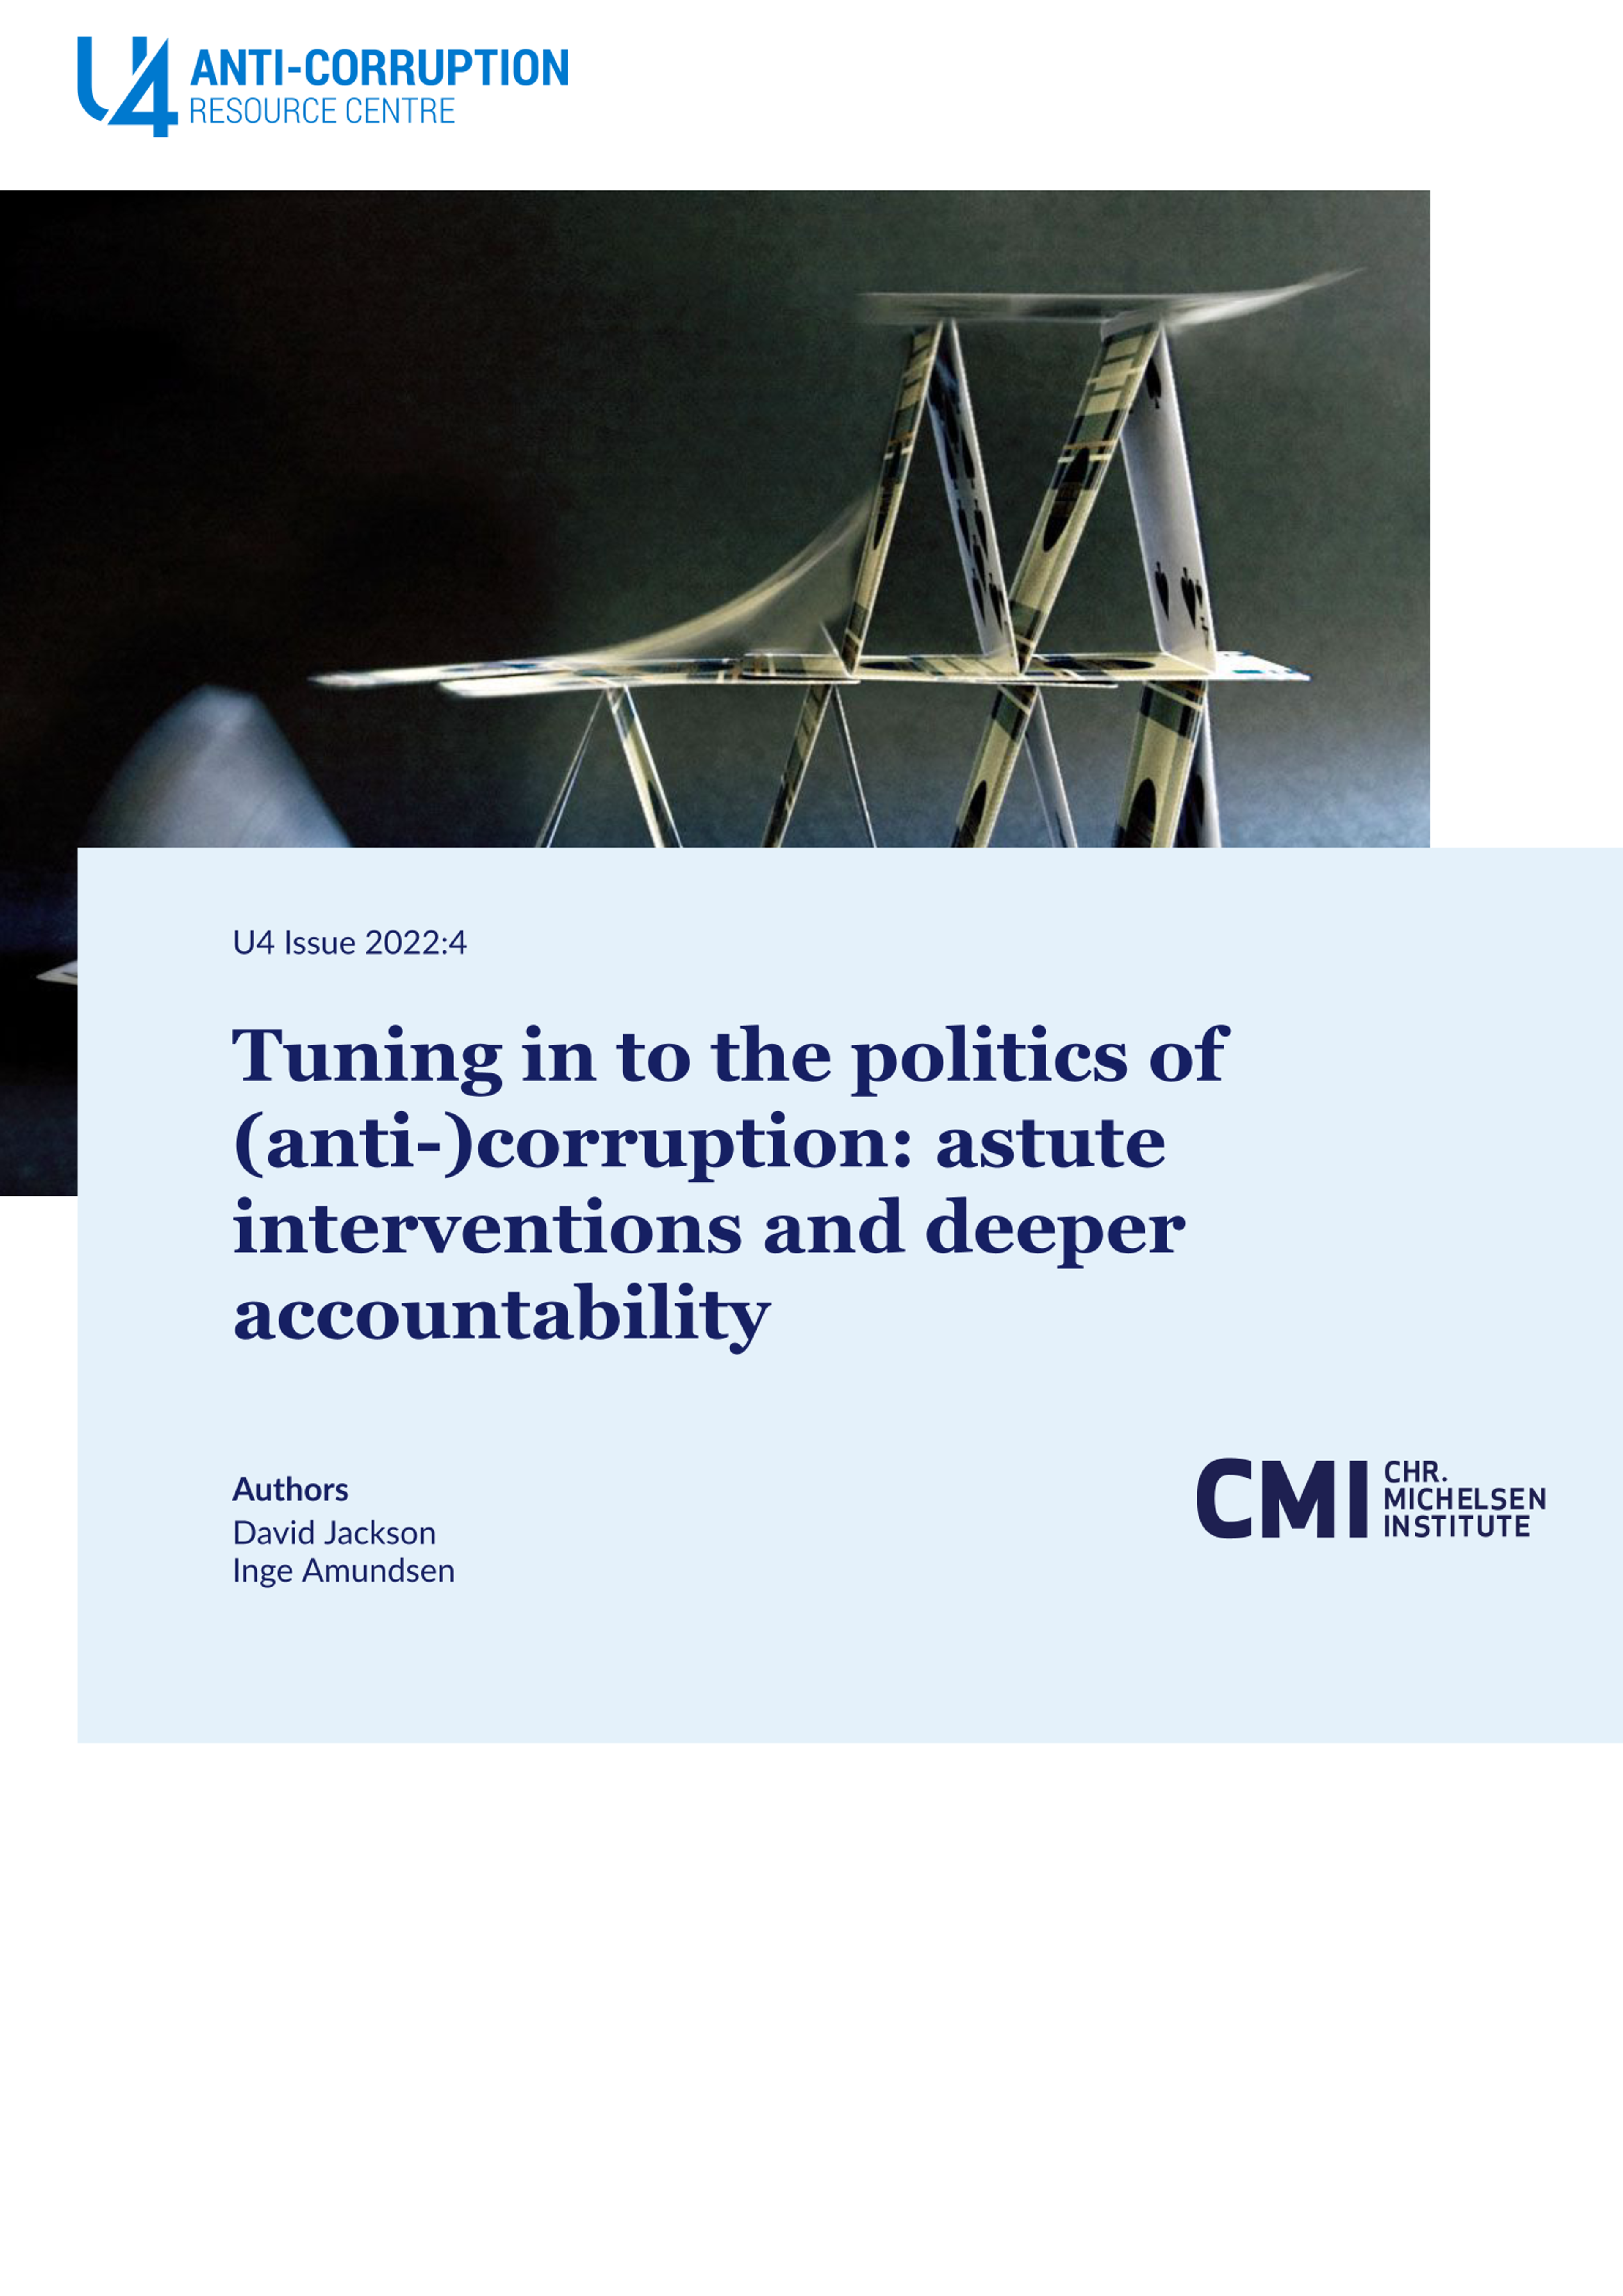 Tuning in to the politics of (anti-)corruption: astute interventions and deeper accountability